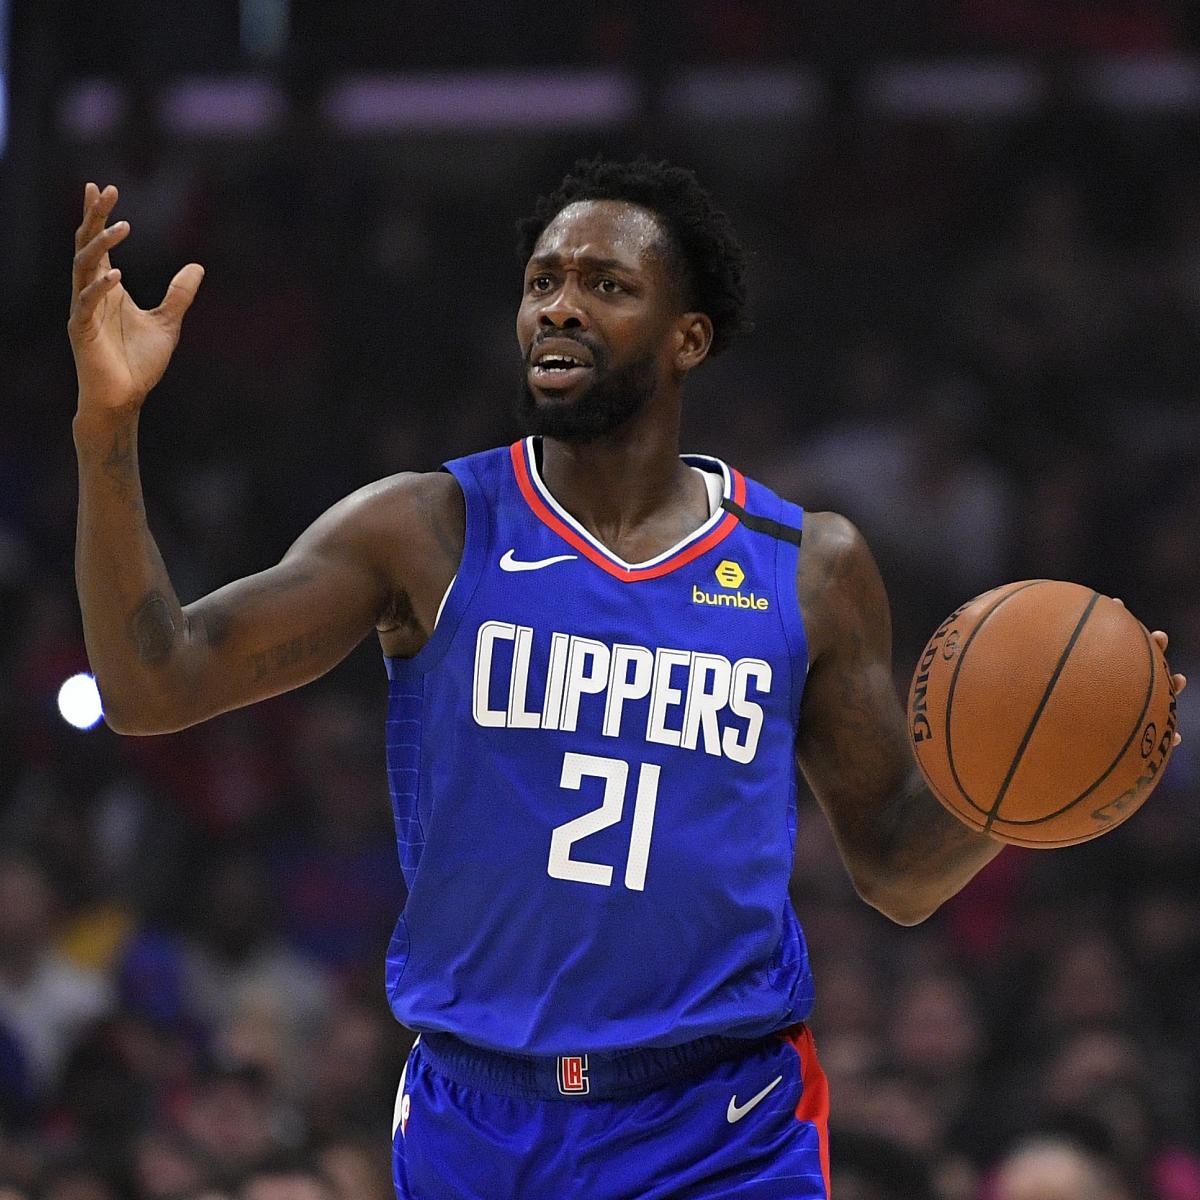 Patrick Beverley Dominated out for Clippers vs. Mavericks Sport 2 with Calf Injury